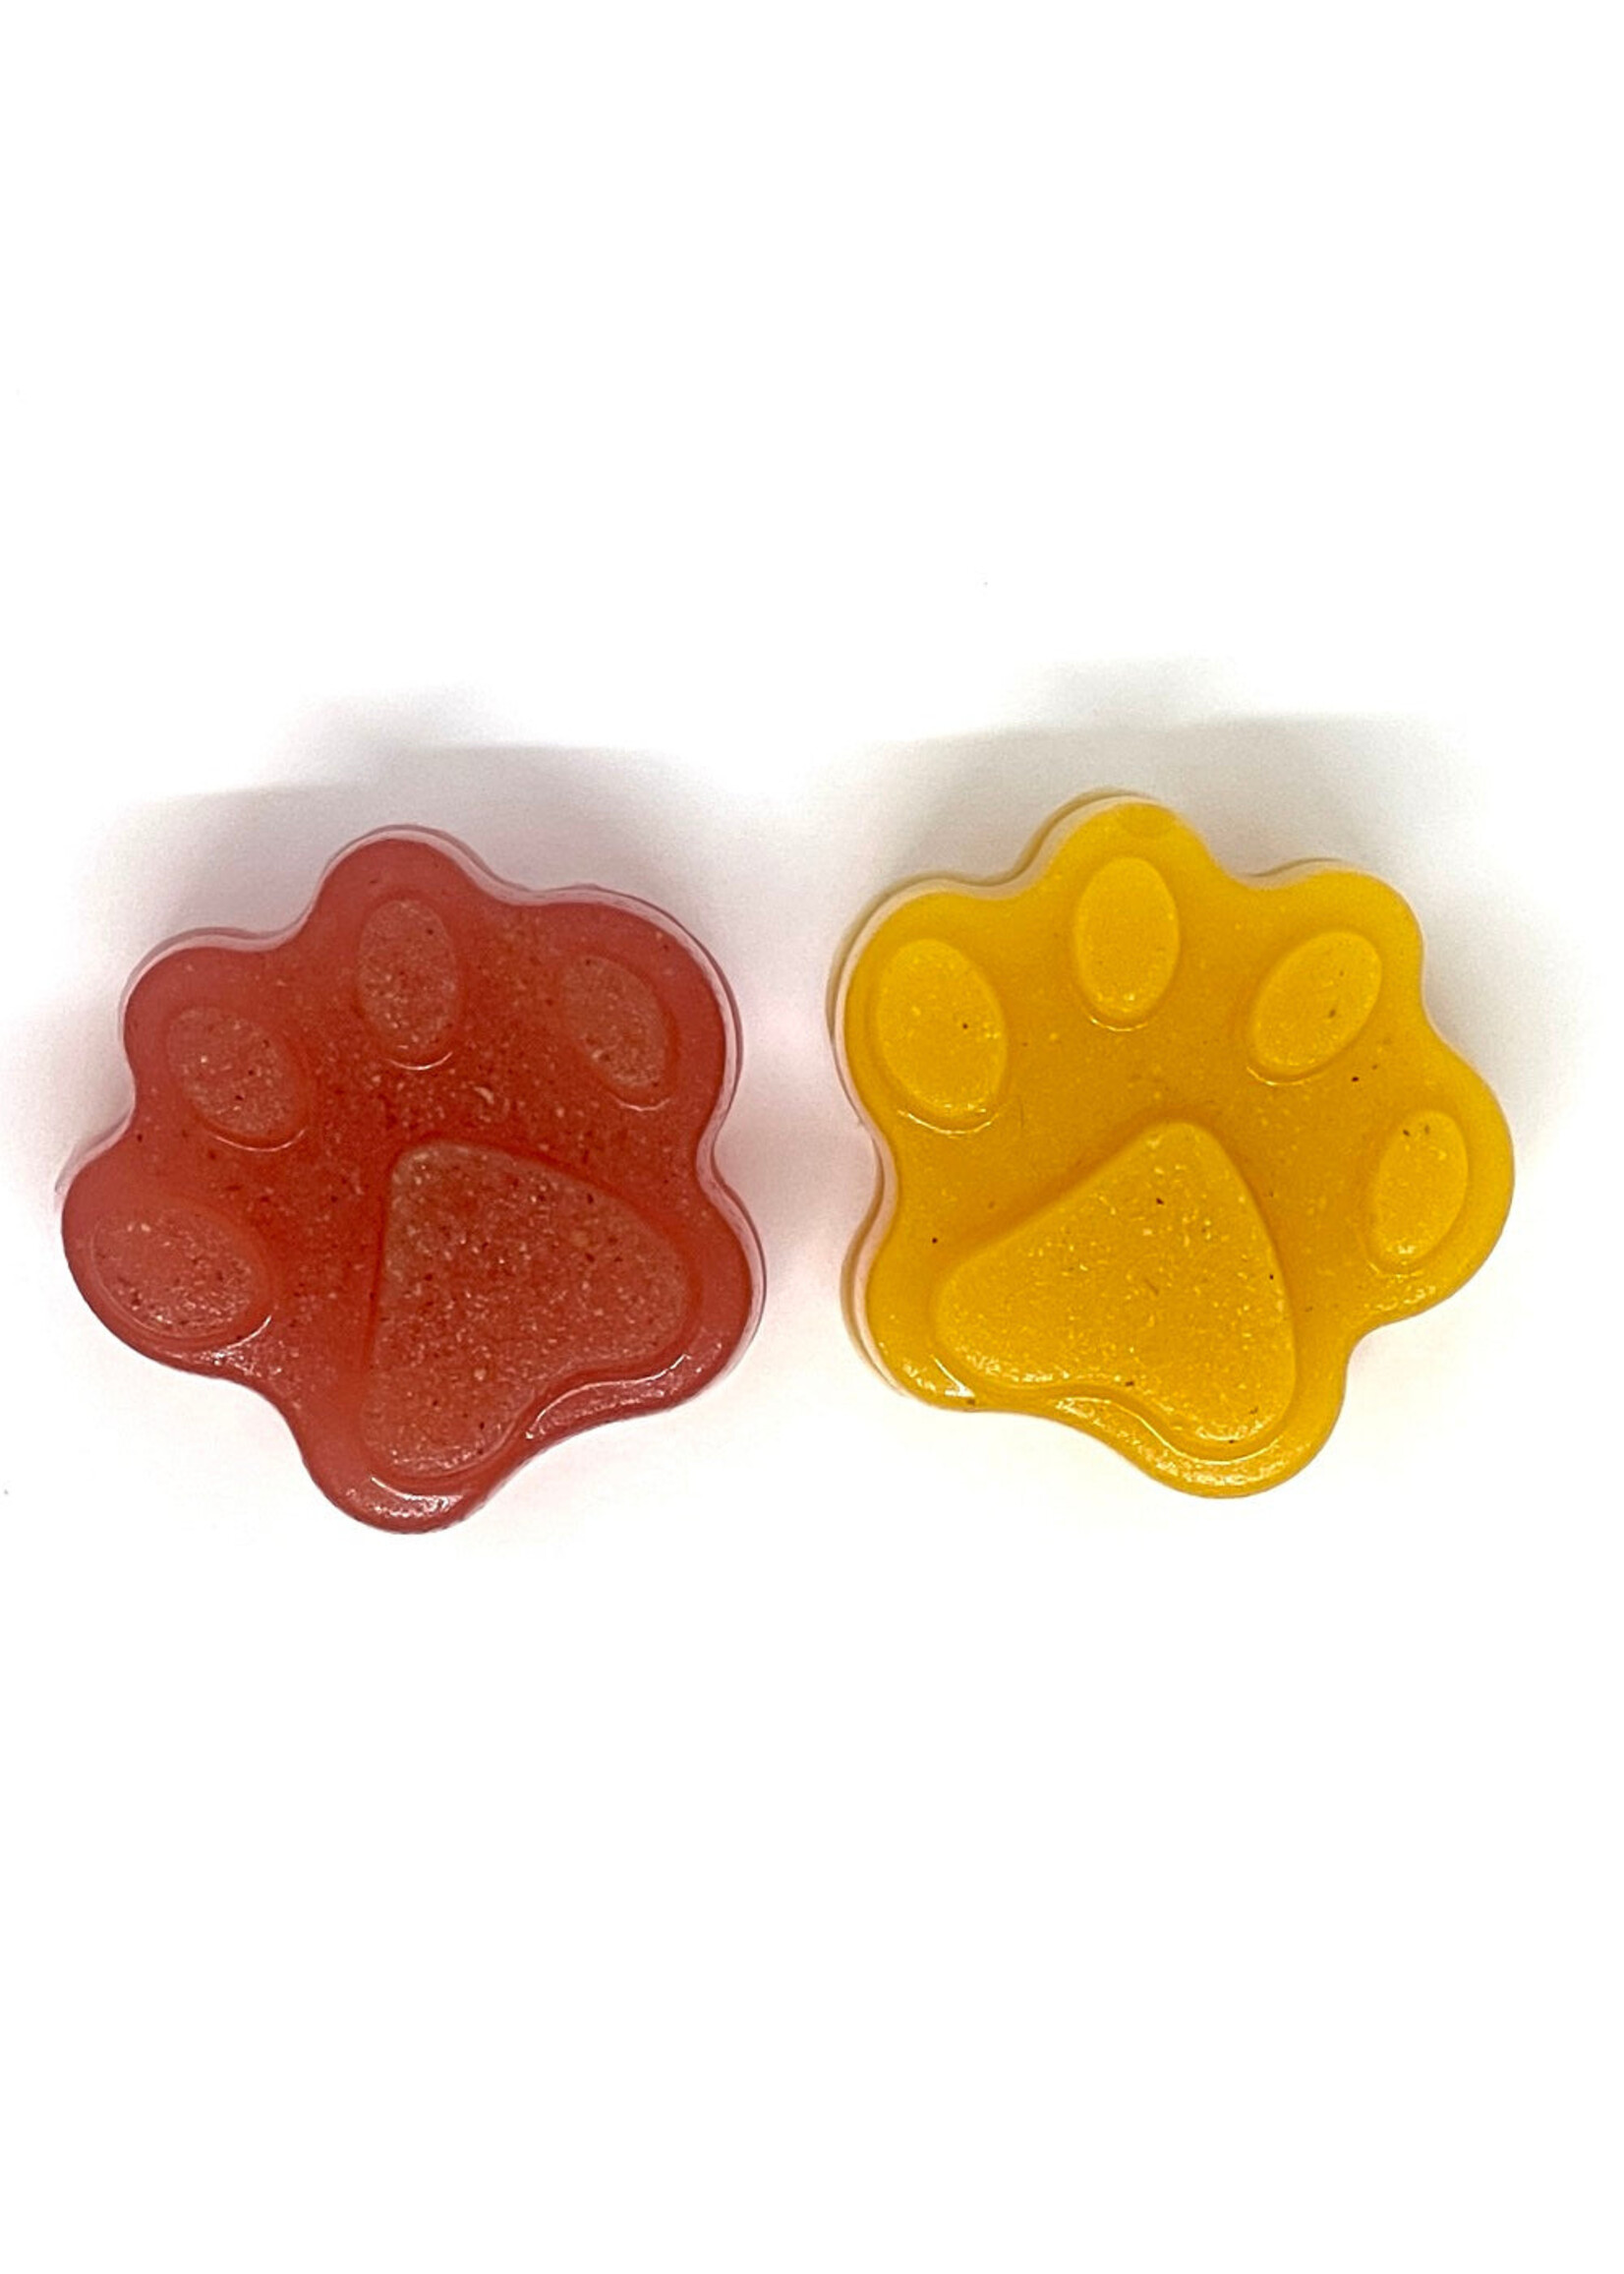 Sodapup Sodapup Dogtastic Jelly Shots Silicone Mold Paw Shape